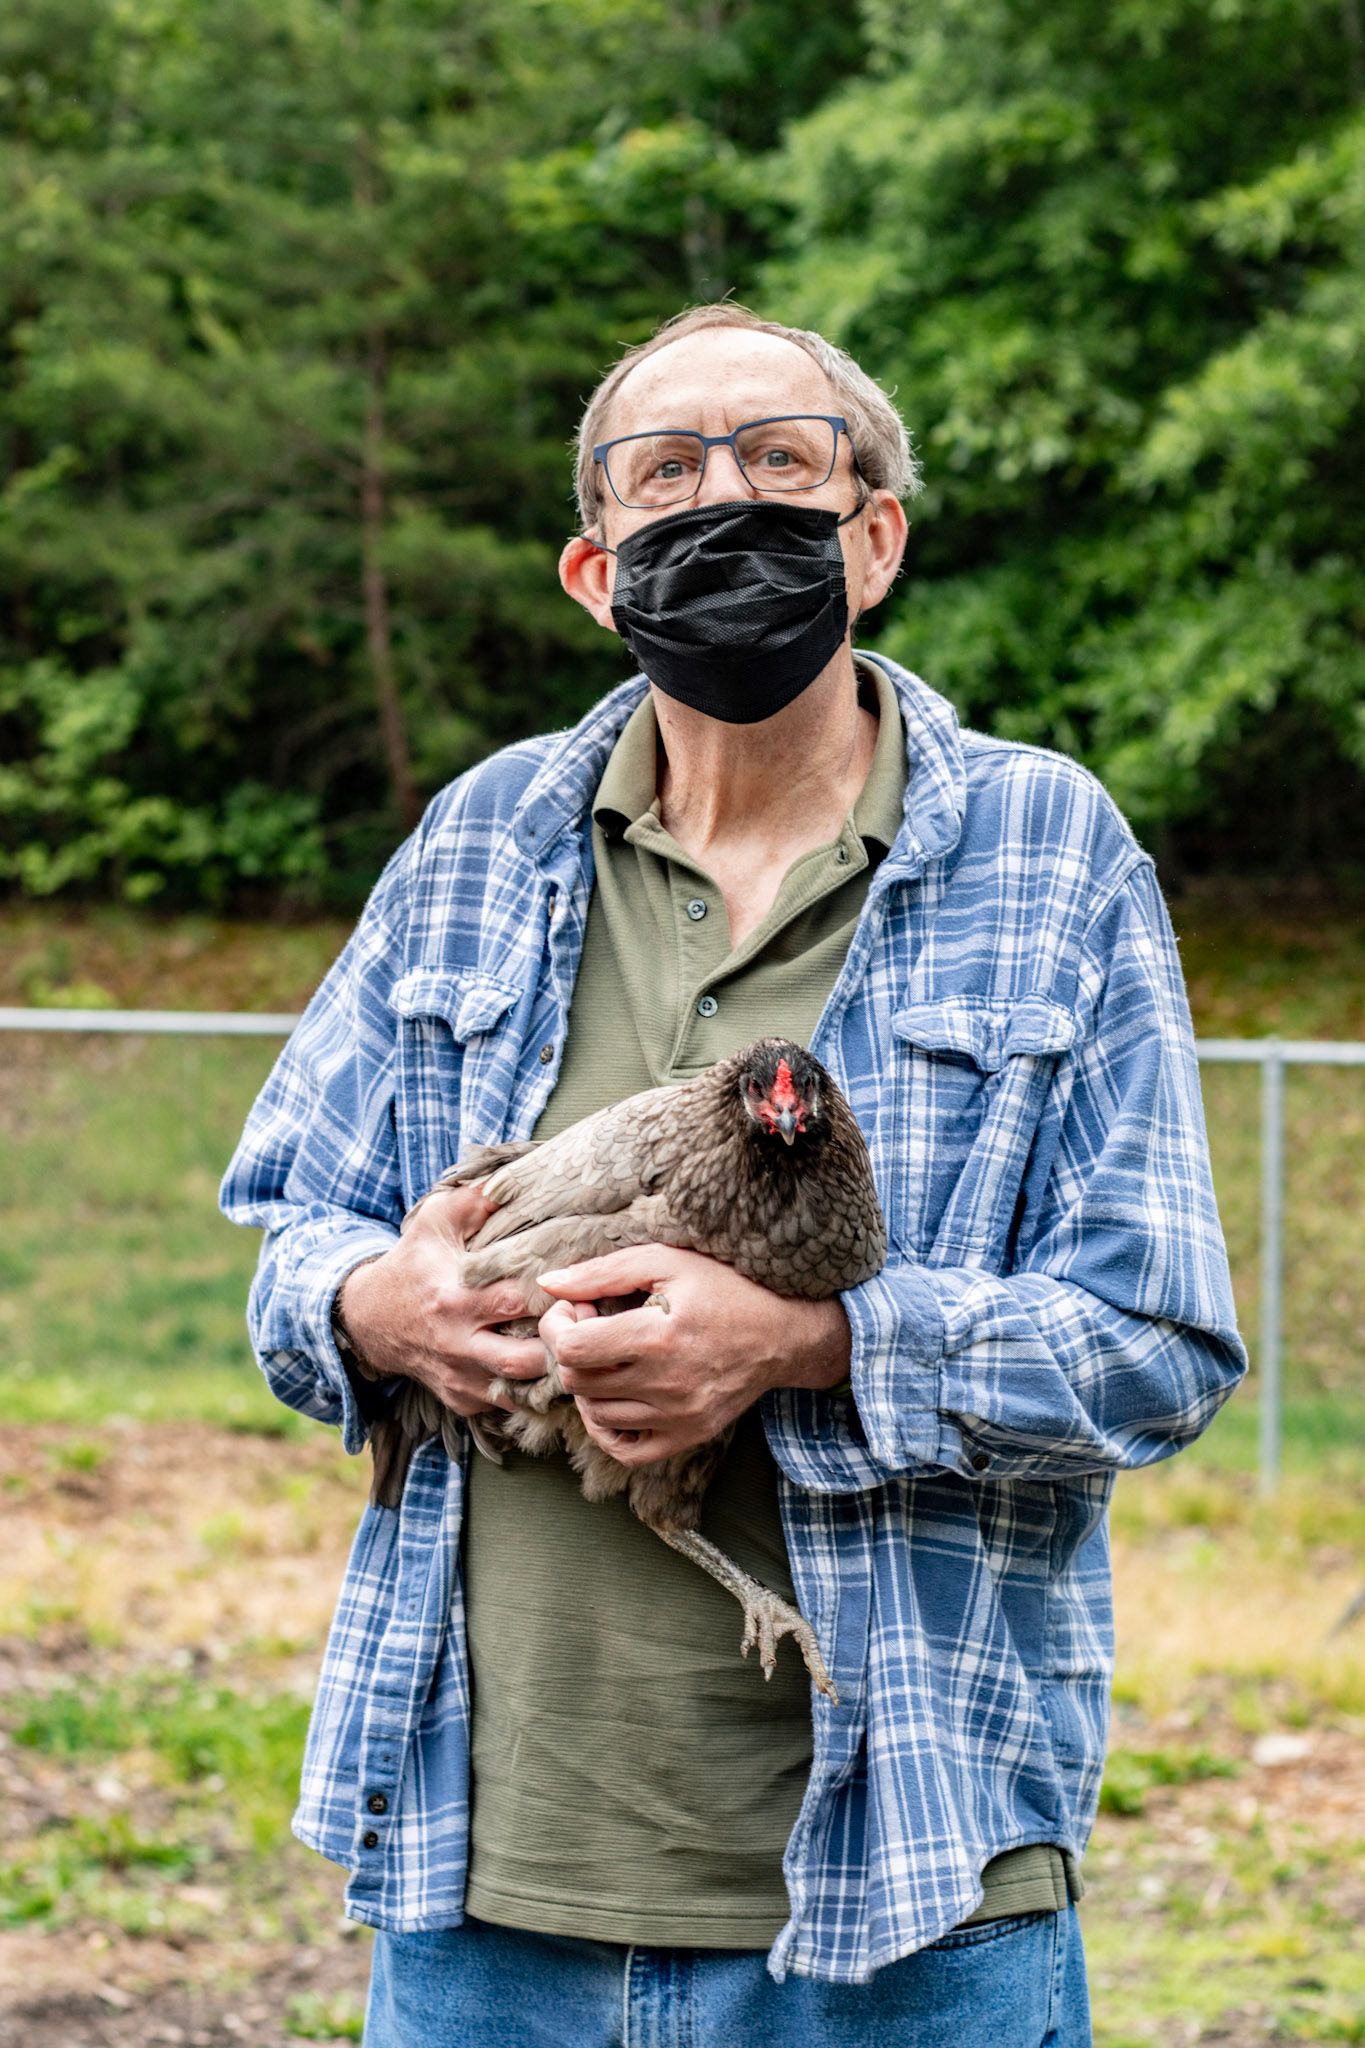 Wild and Free participant, Tim, holds one of the chickens from the program's chicken coop.